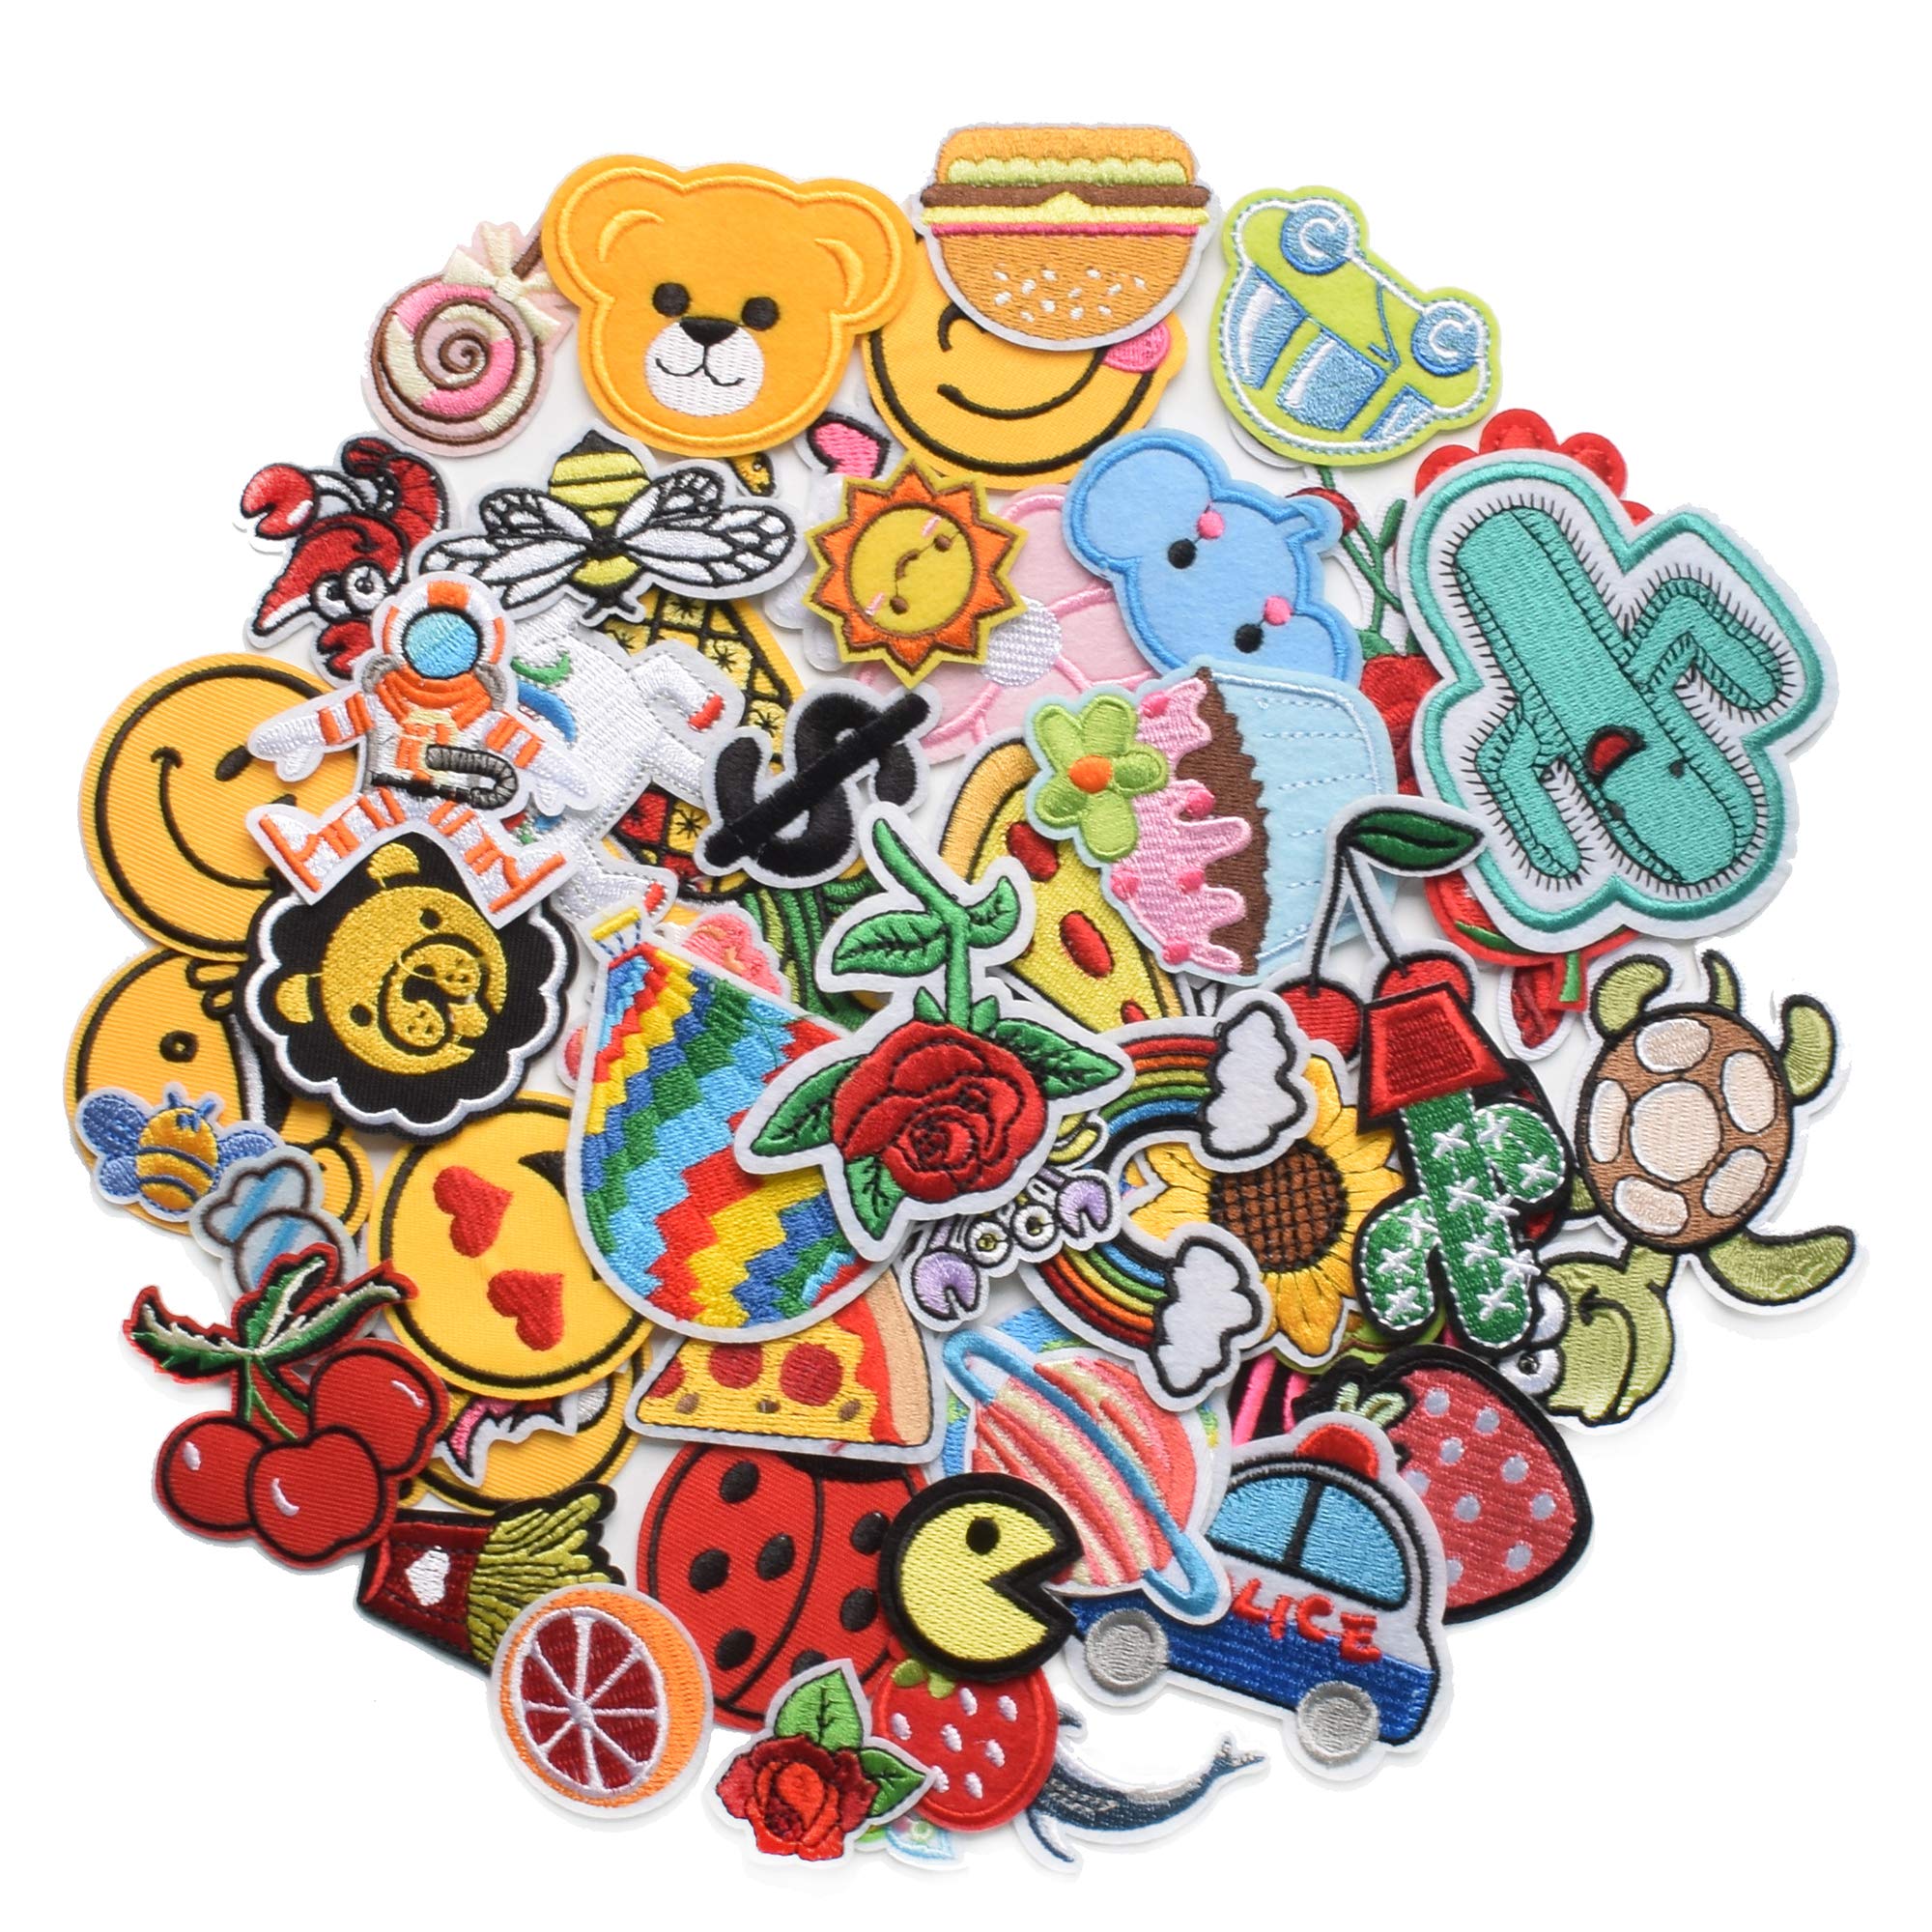 Iron-on Patches CUTE set of 10 